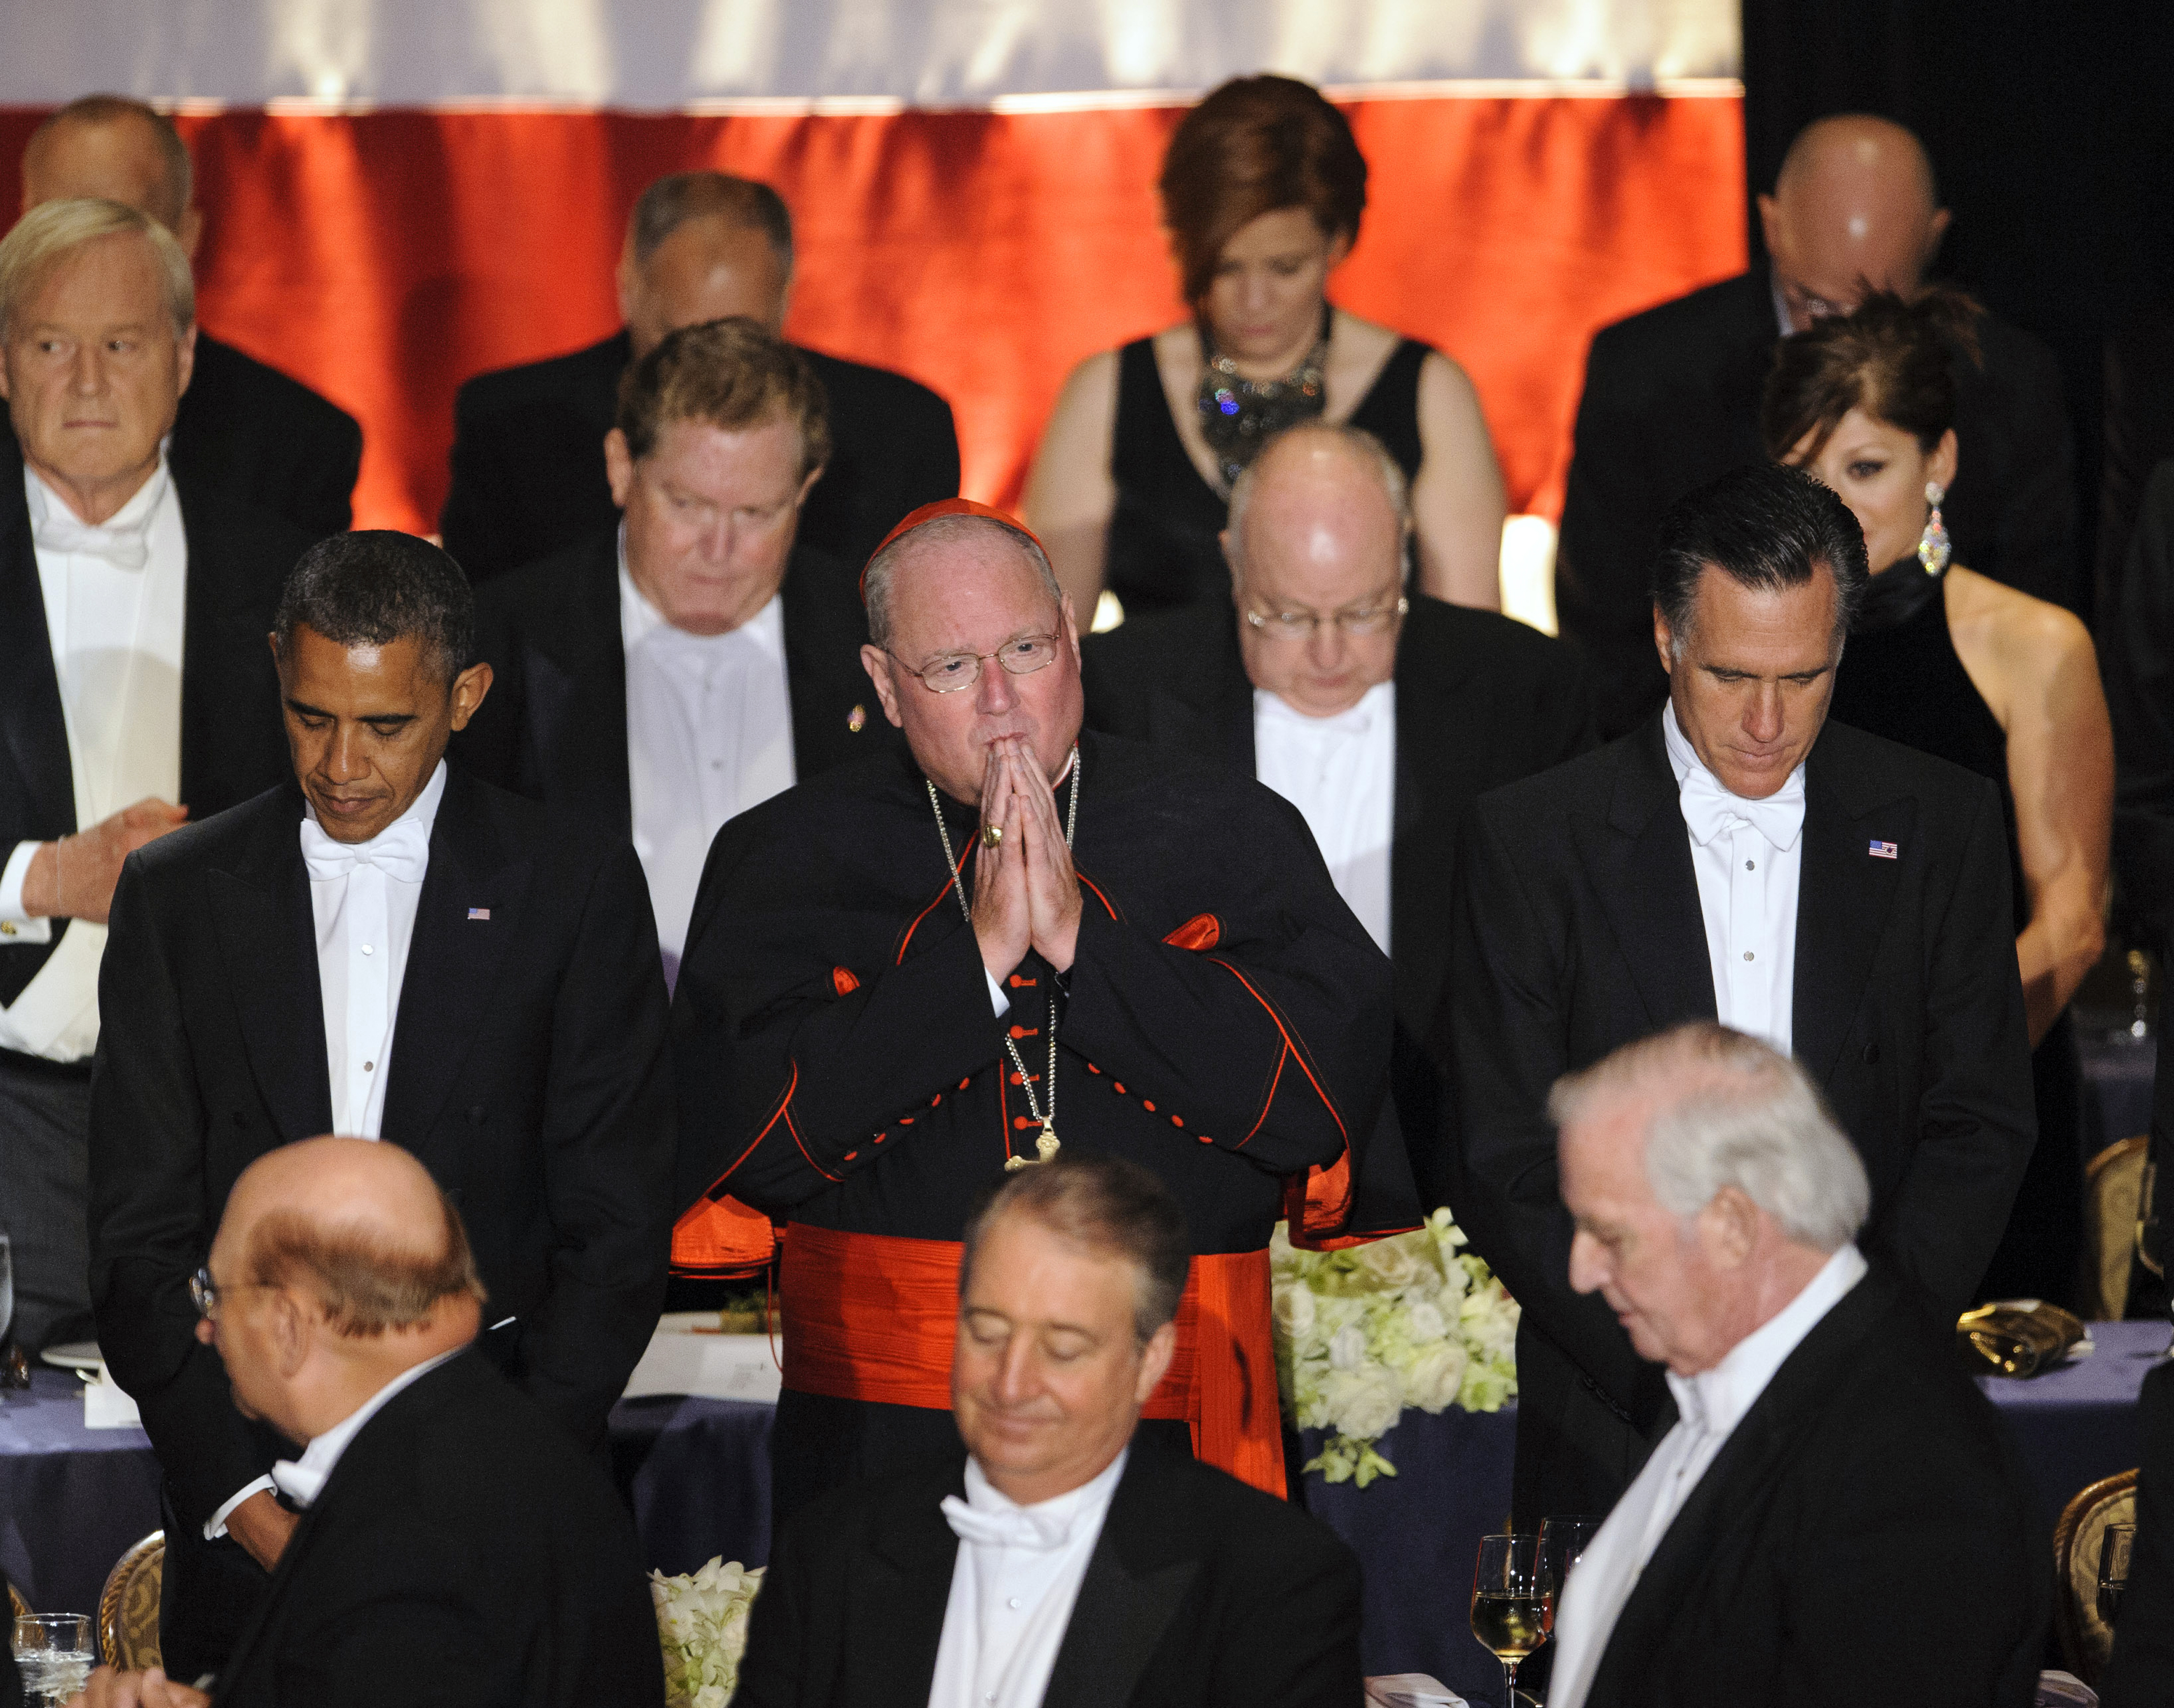 President Barack Obama, Cardinal Timothy Dolan, Archbishop of New York, and Republican presidential candidate Mitt Romney pray during the 67th Annual Alfred E. Smith Memorial Foundation Dinner at the Waldorf Astoria Hotel in New York. (New York Daily News—NY Daily News via Getty Images)